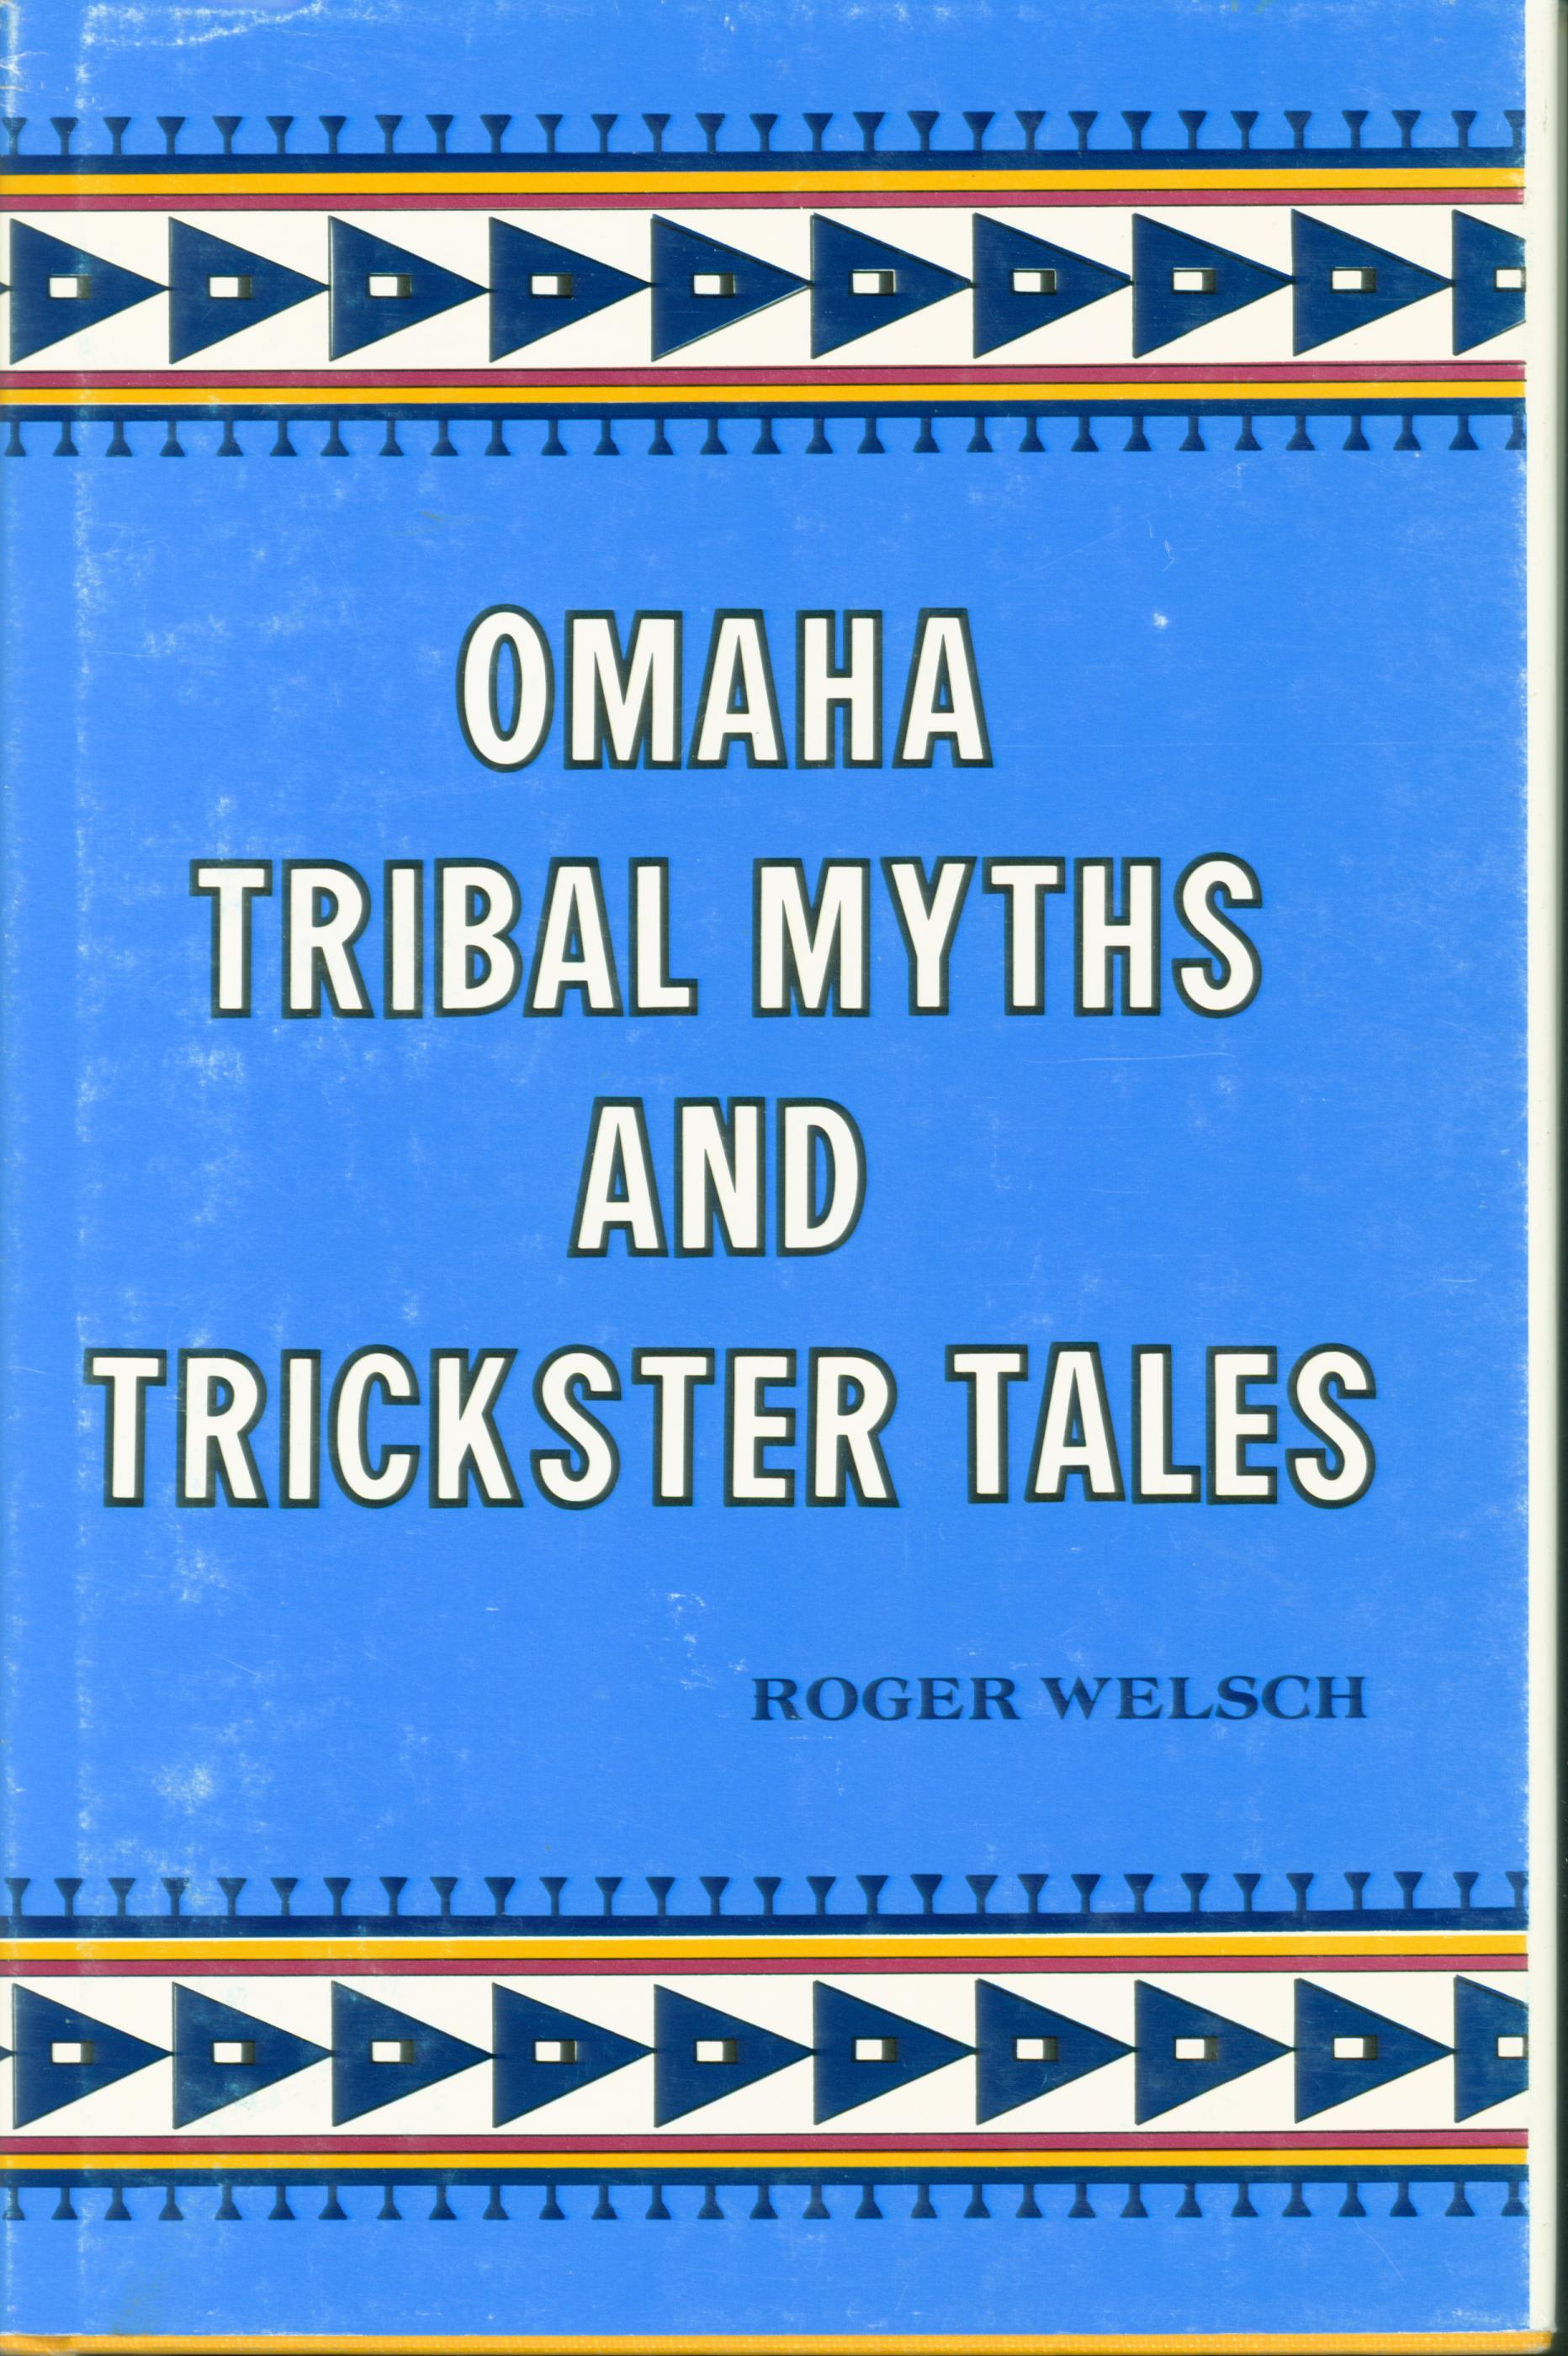 OMAHA TRIBAL MYTHS AND TRICKSTER TALES.